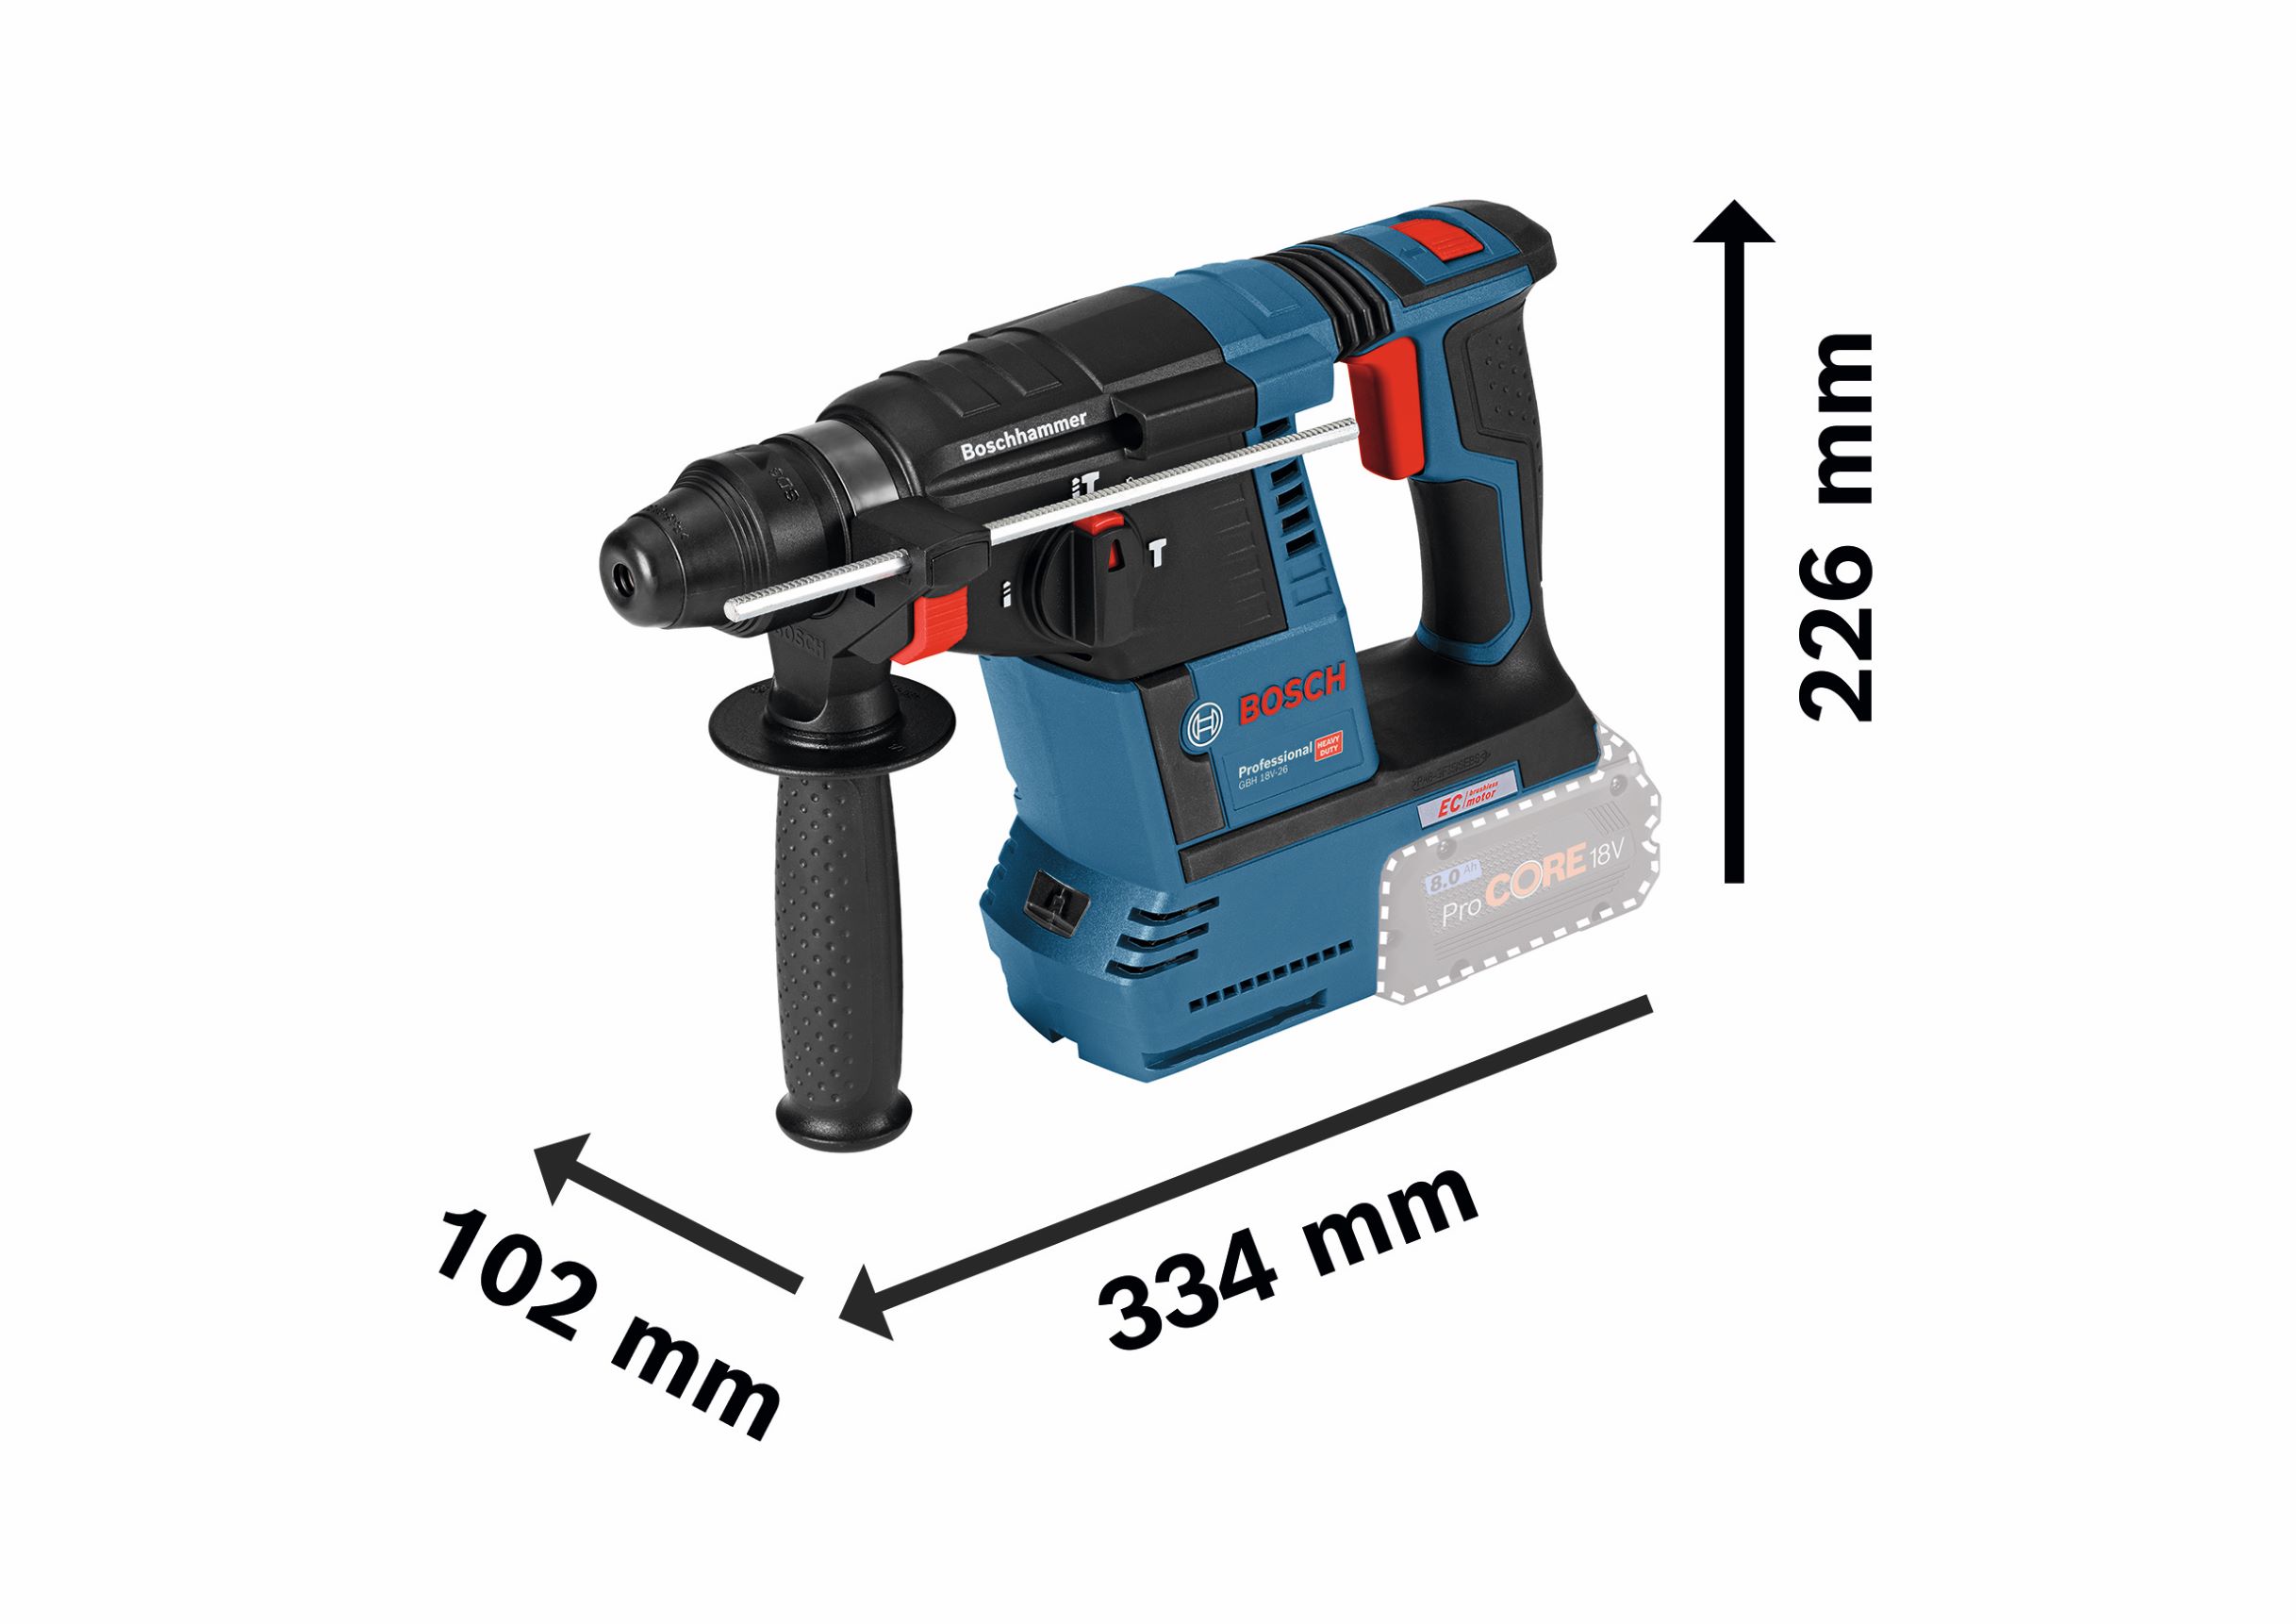 GBH 18V-26 Professional Cordless Rotary Hammer in L-Boxx Bosch - 3